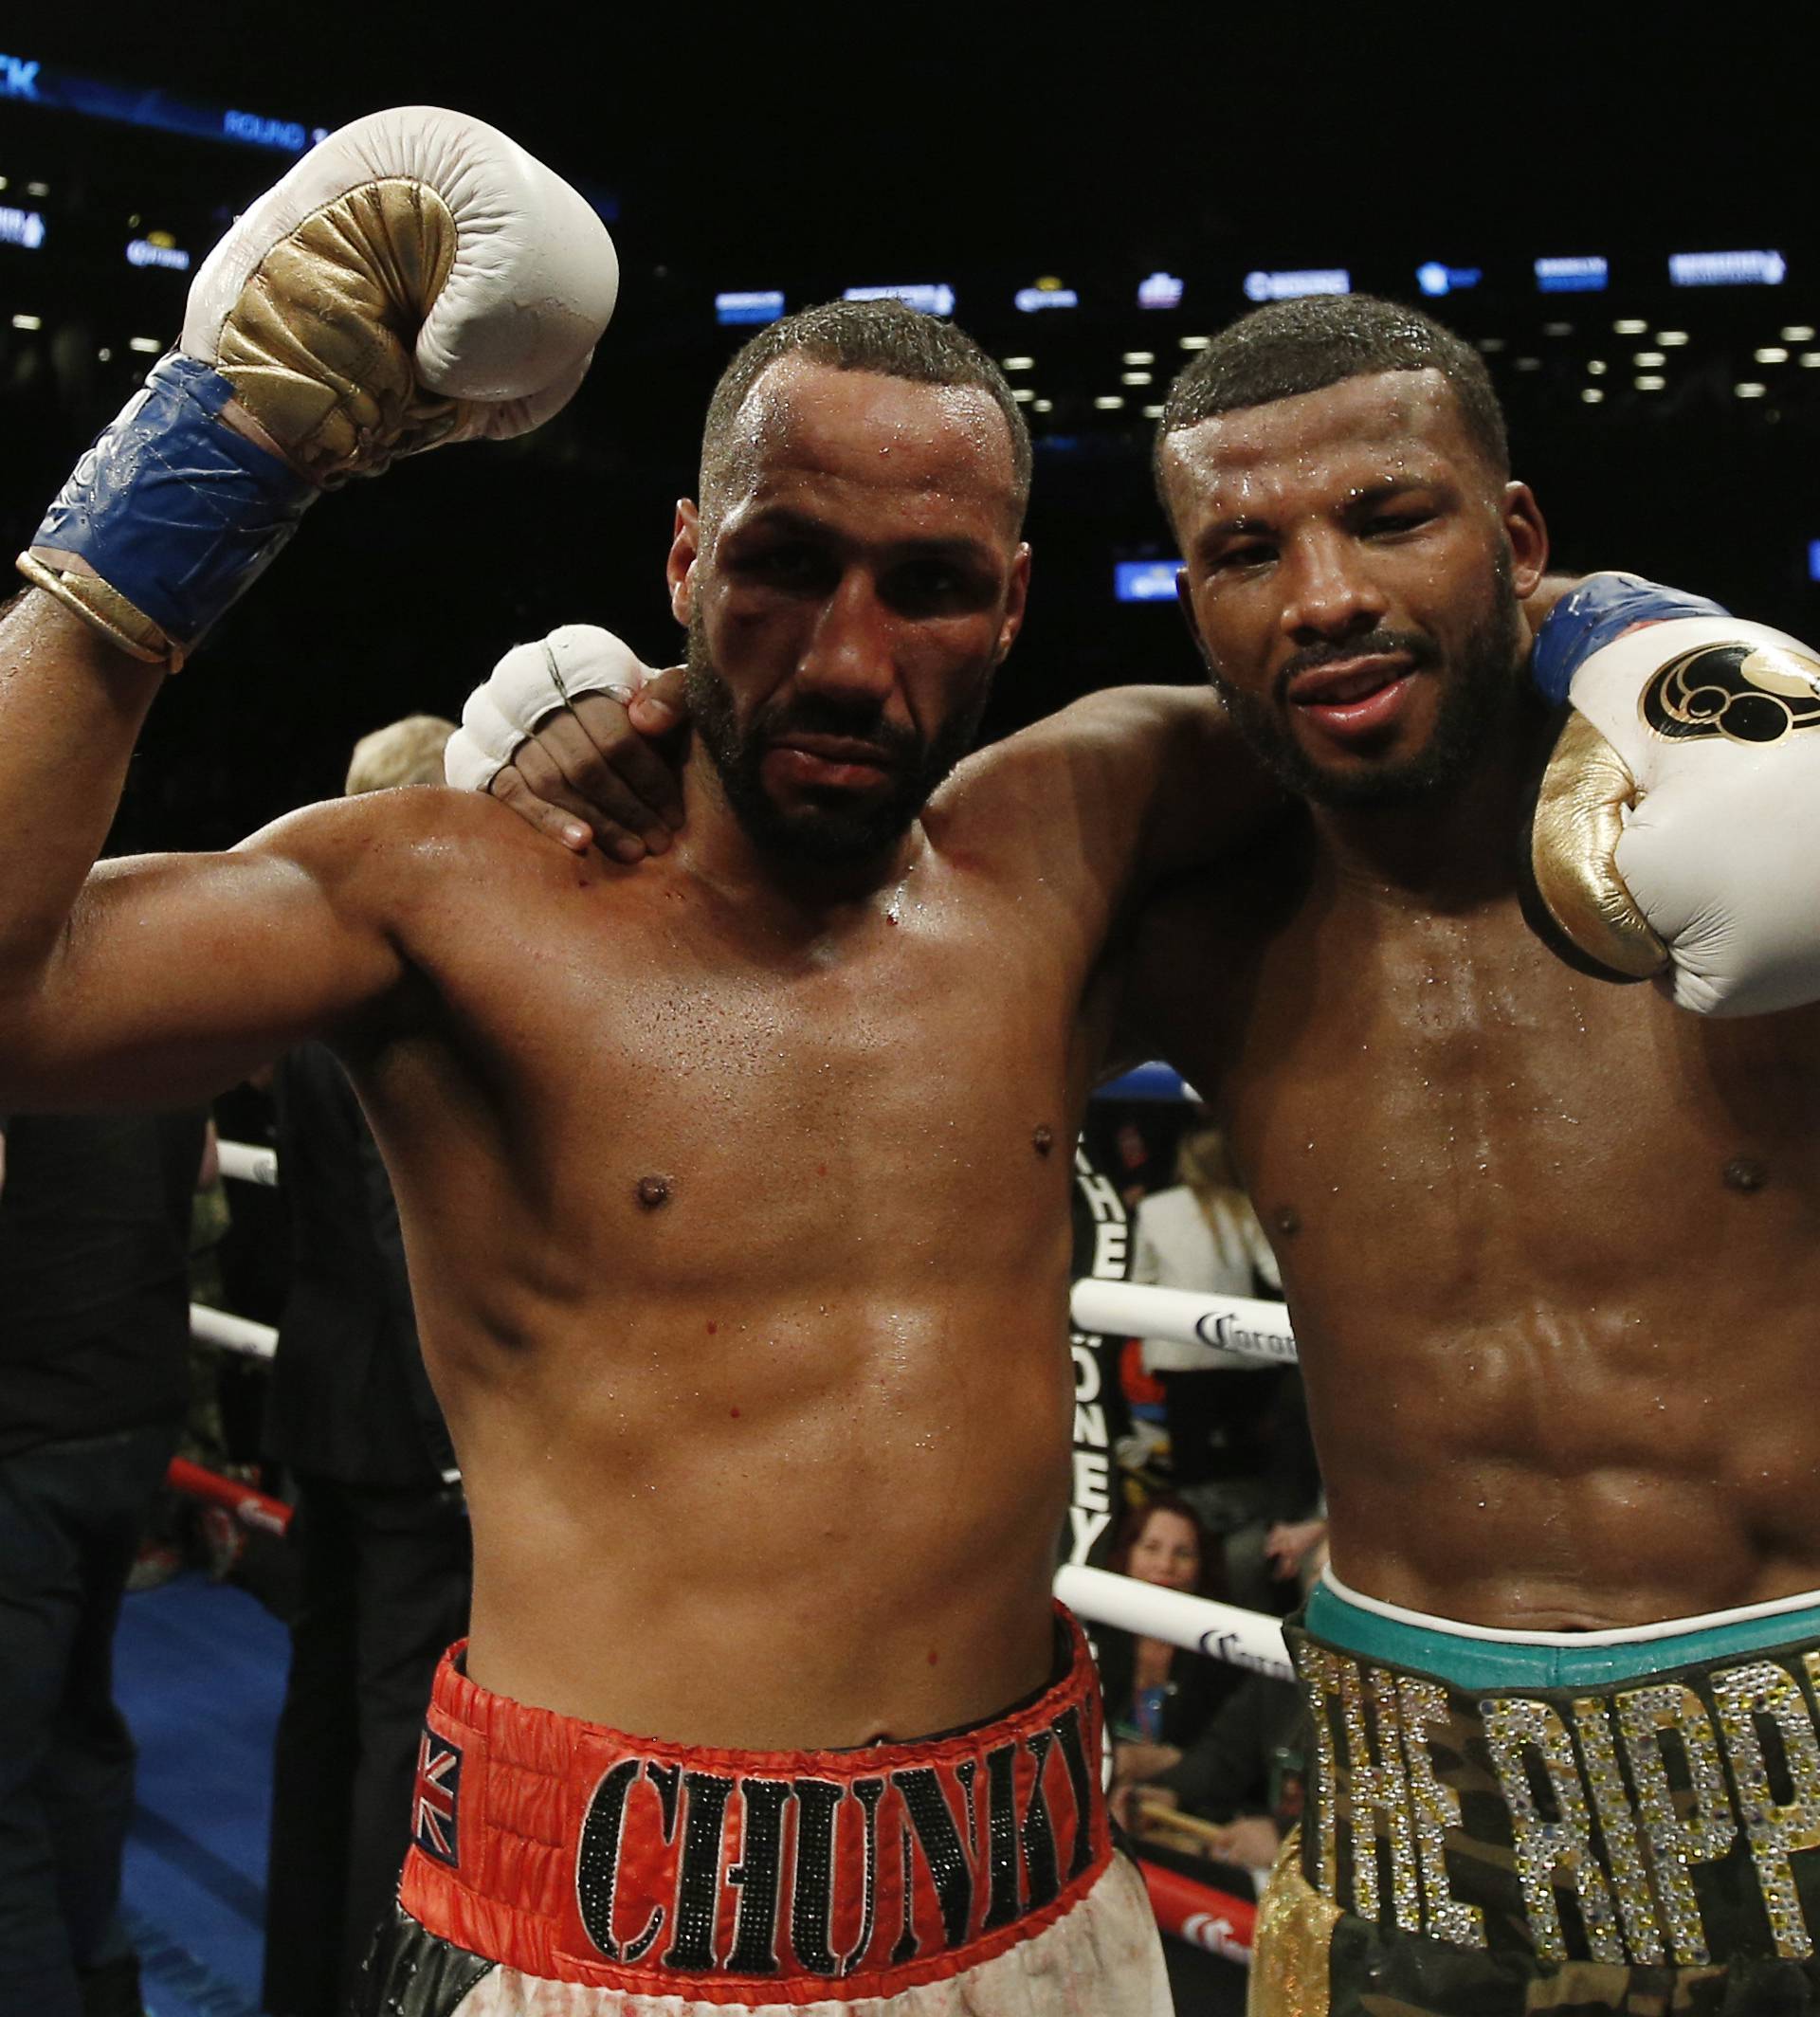 James DeGale and Badou Jack celebrate after their fight which ended in a draw